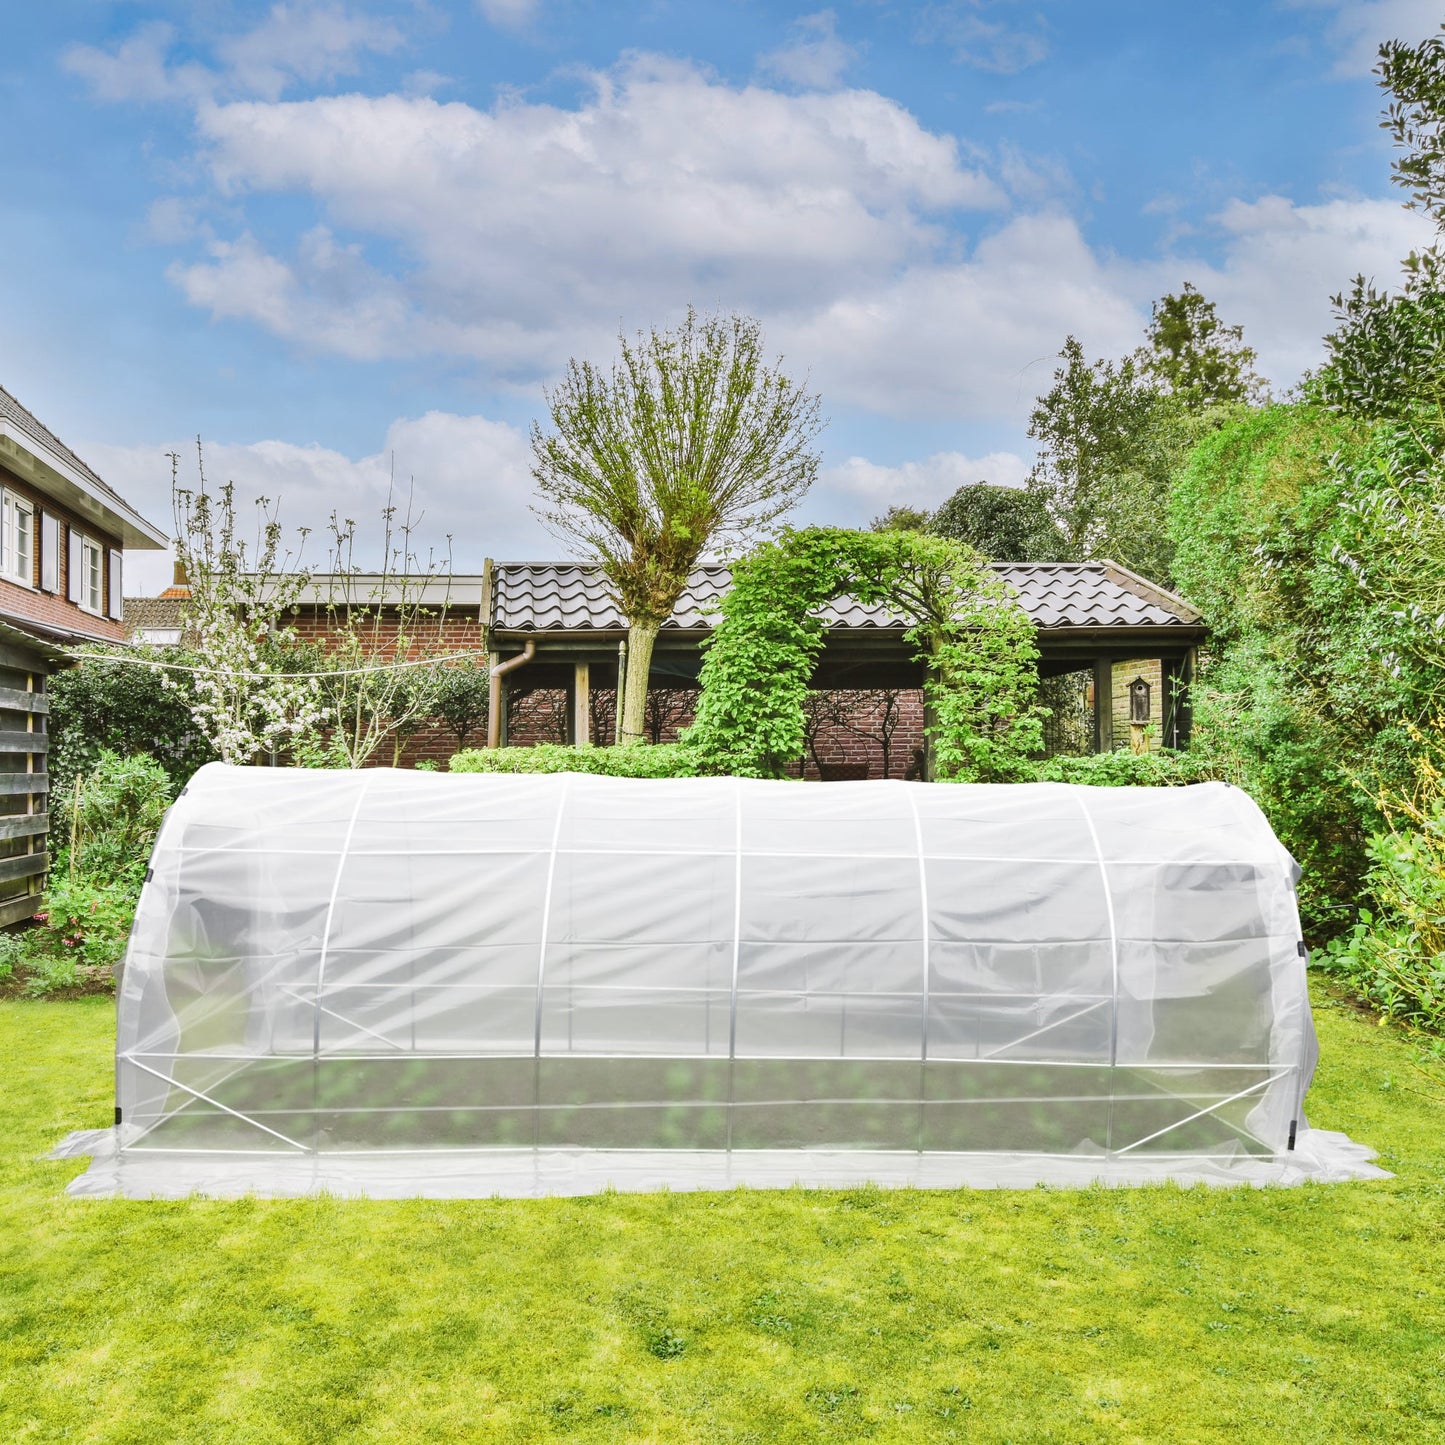 Galvanized Pipe and PE Walk-in Tunnel Greenhouse 20 FT x 10 FT x 7 FT, with Zippered Roll-up Door, Uv Proof & Waterproof & Rust-Proof, Transparent - Aoodor